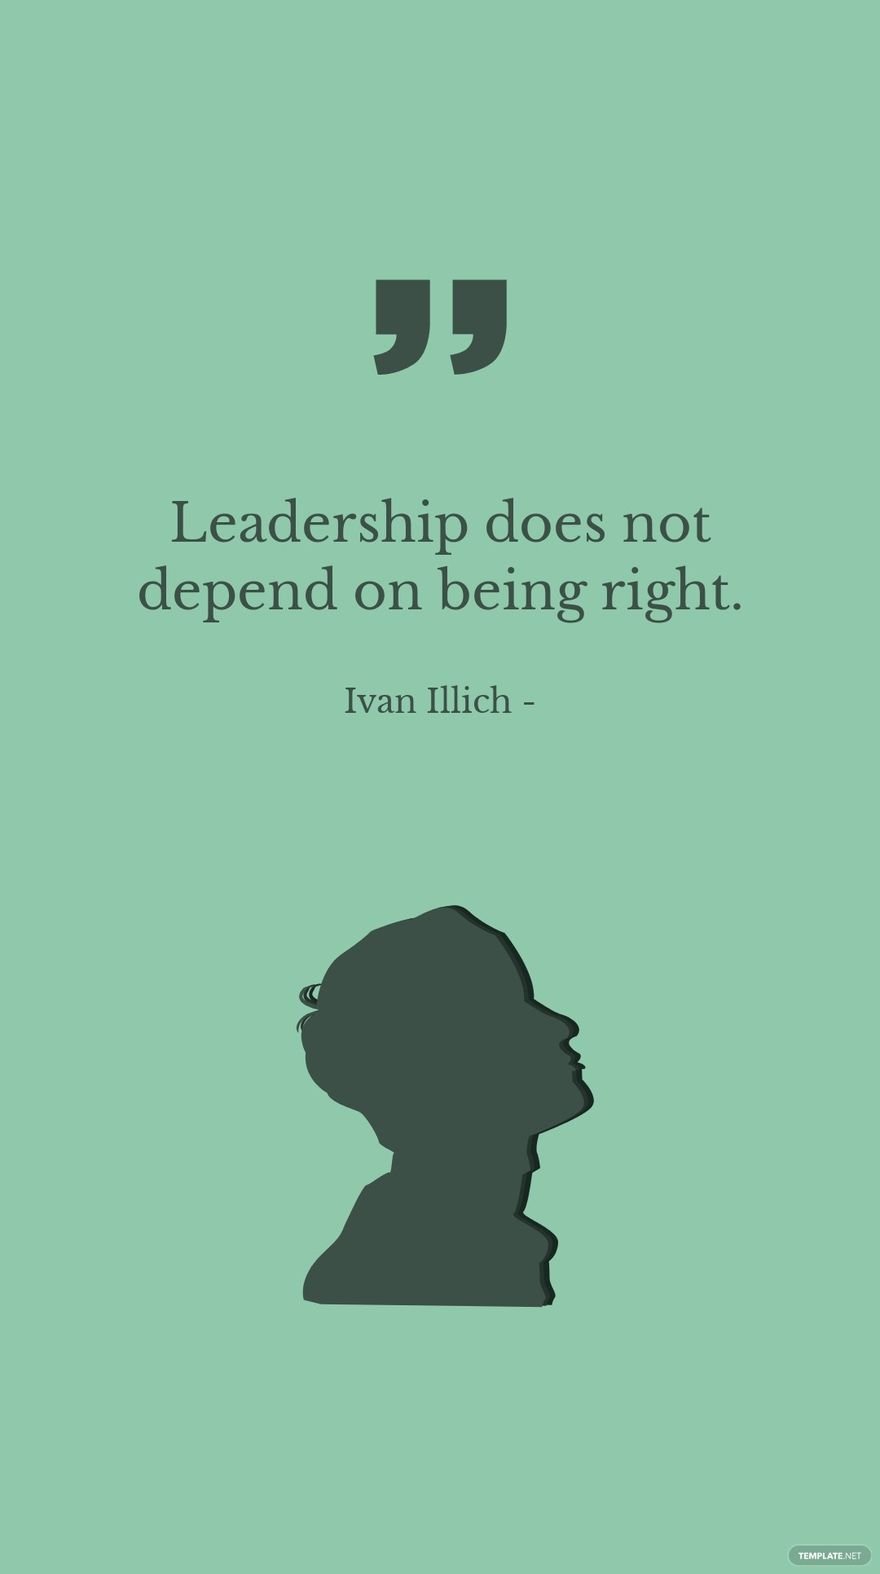 Ivan Illich - Leadership does not depend on being right.